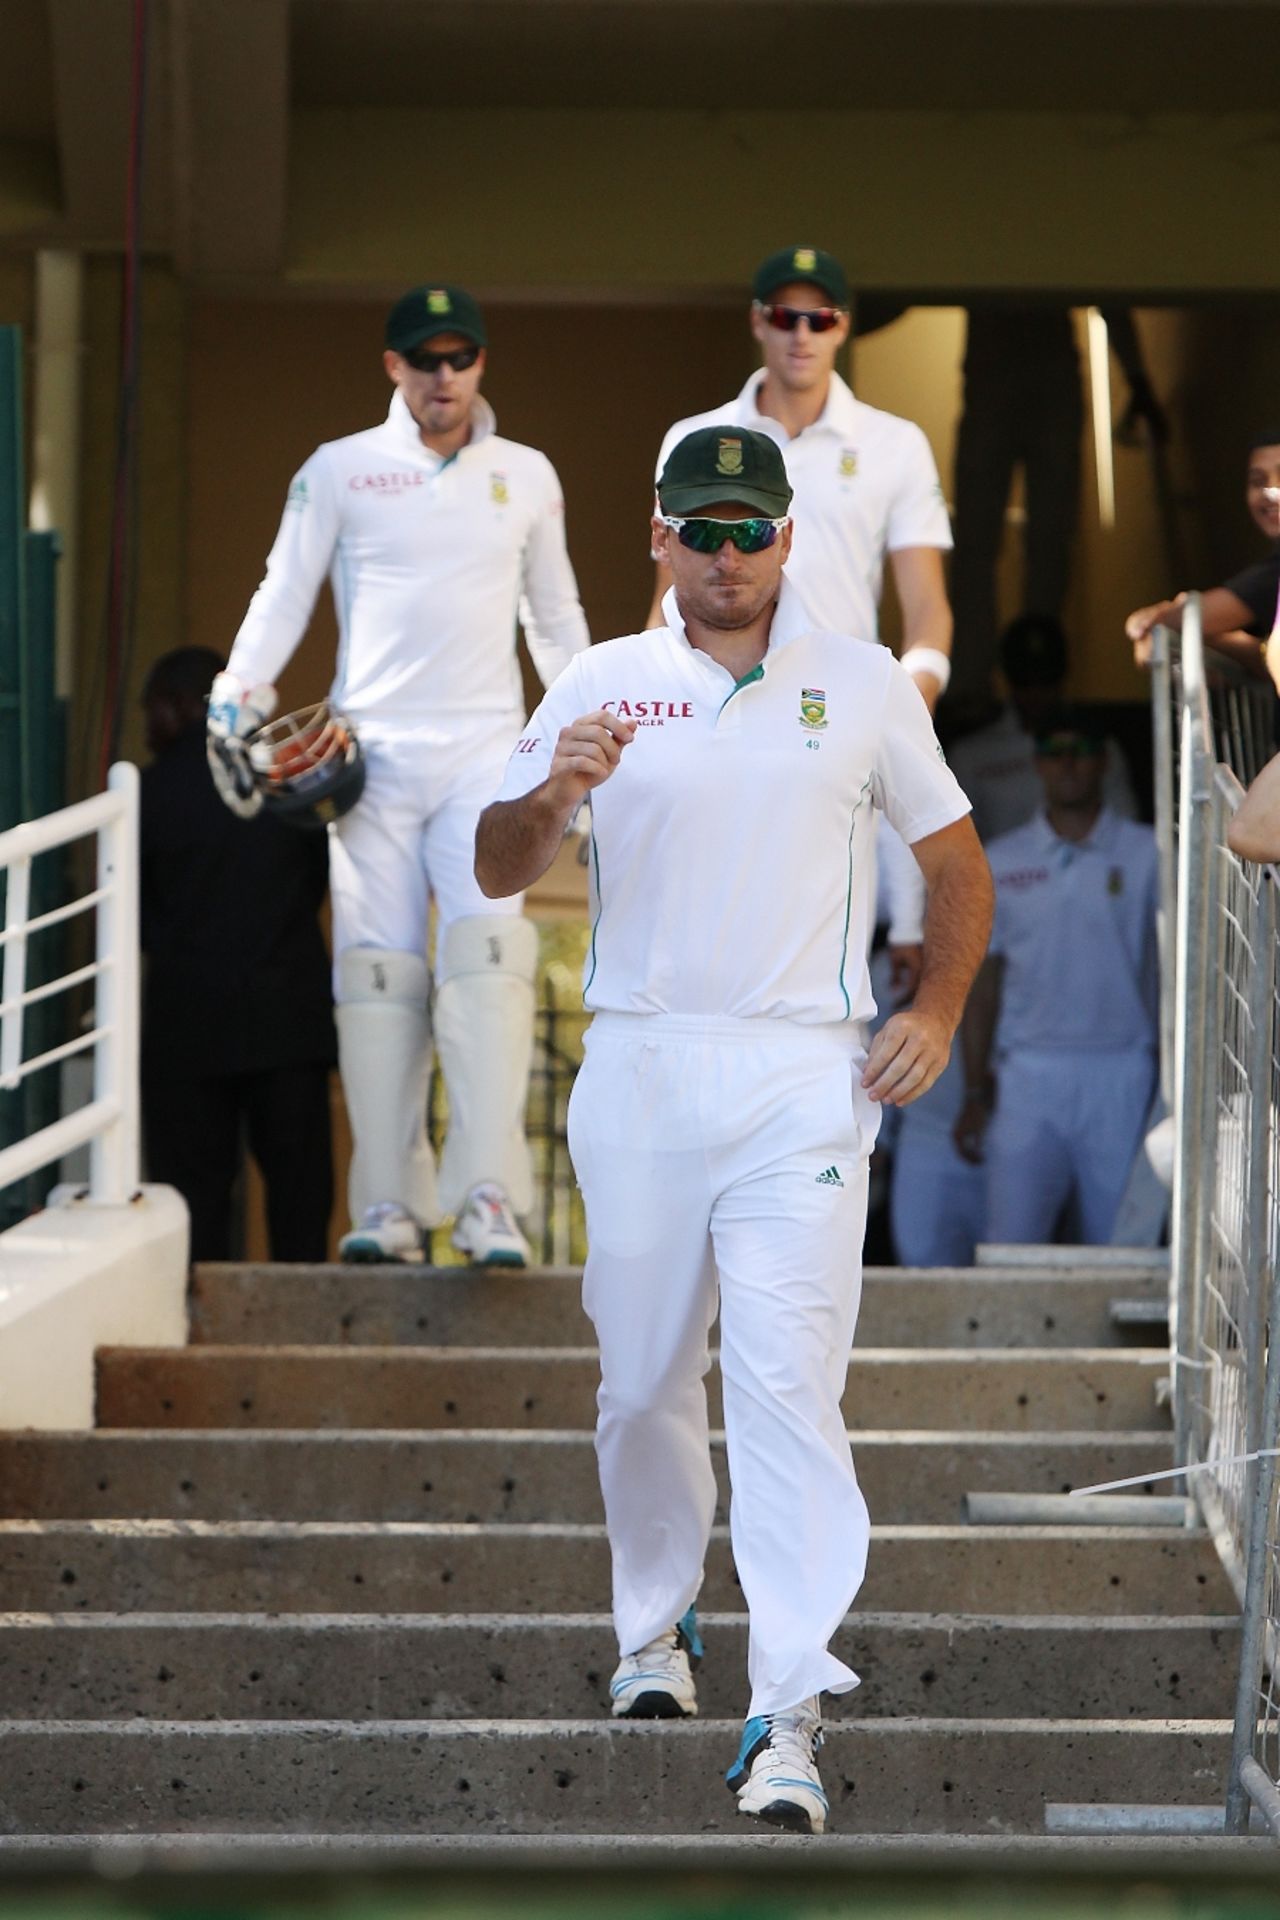 Graeme Smith leads the South Africans on to the field, South Africa v Australia, 3rd Test, Cape Town, 4th day, March 4, 2014